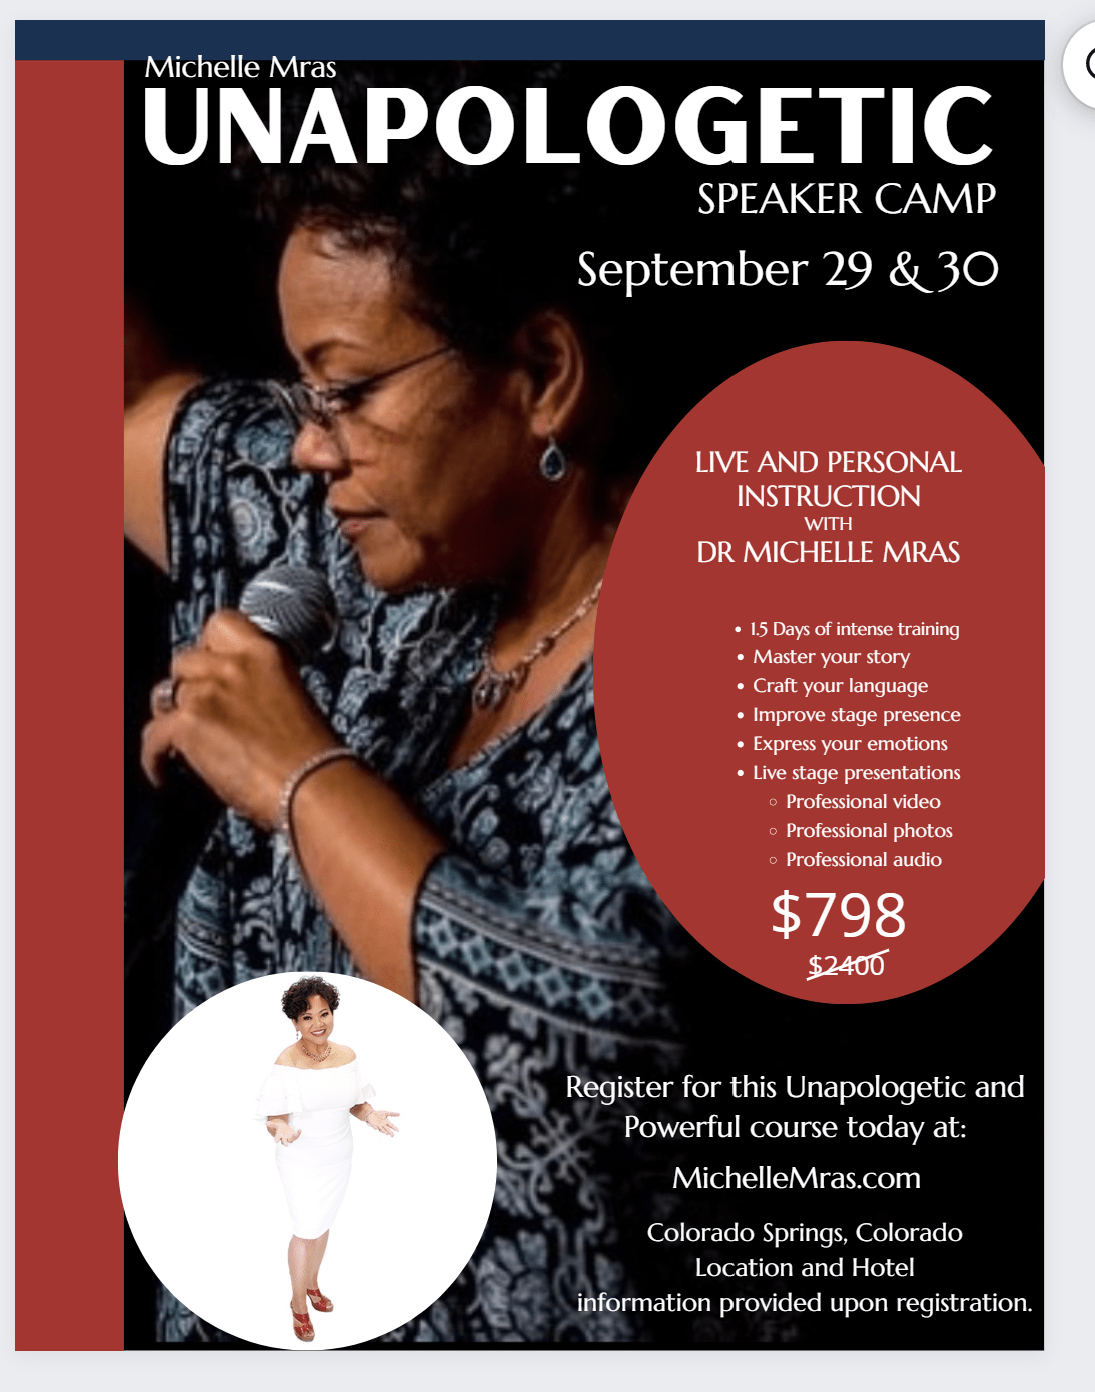 poster of Michelle Mras Unapologetic Speaker Camp